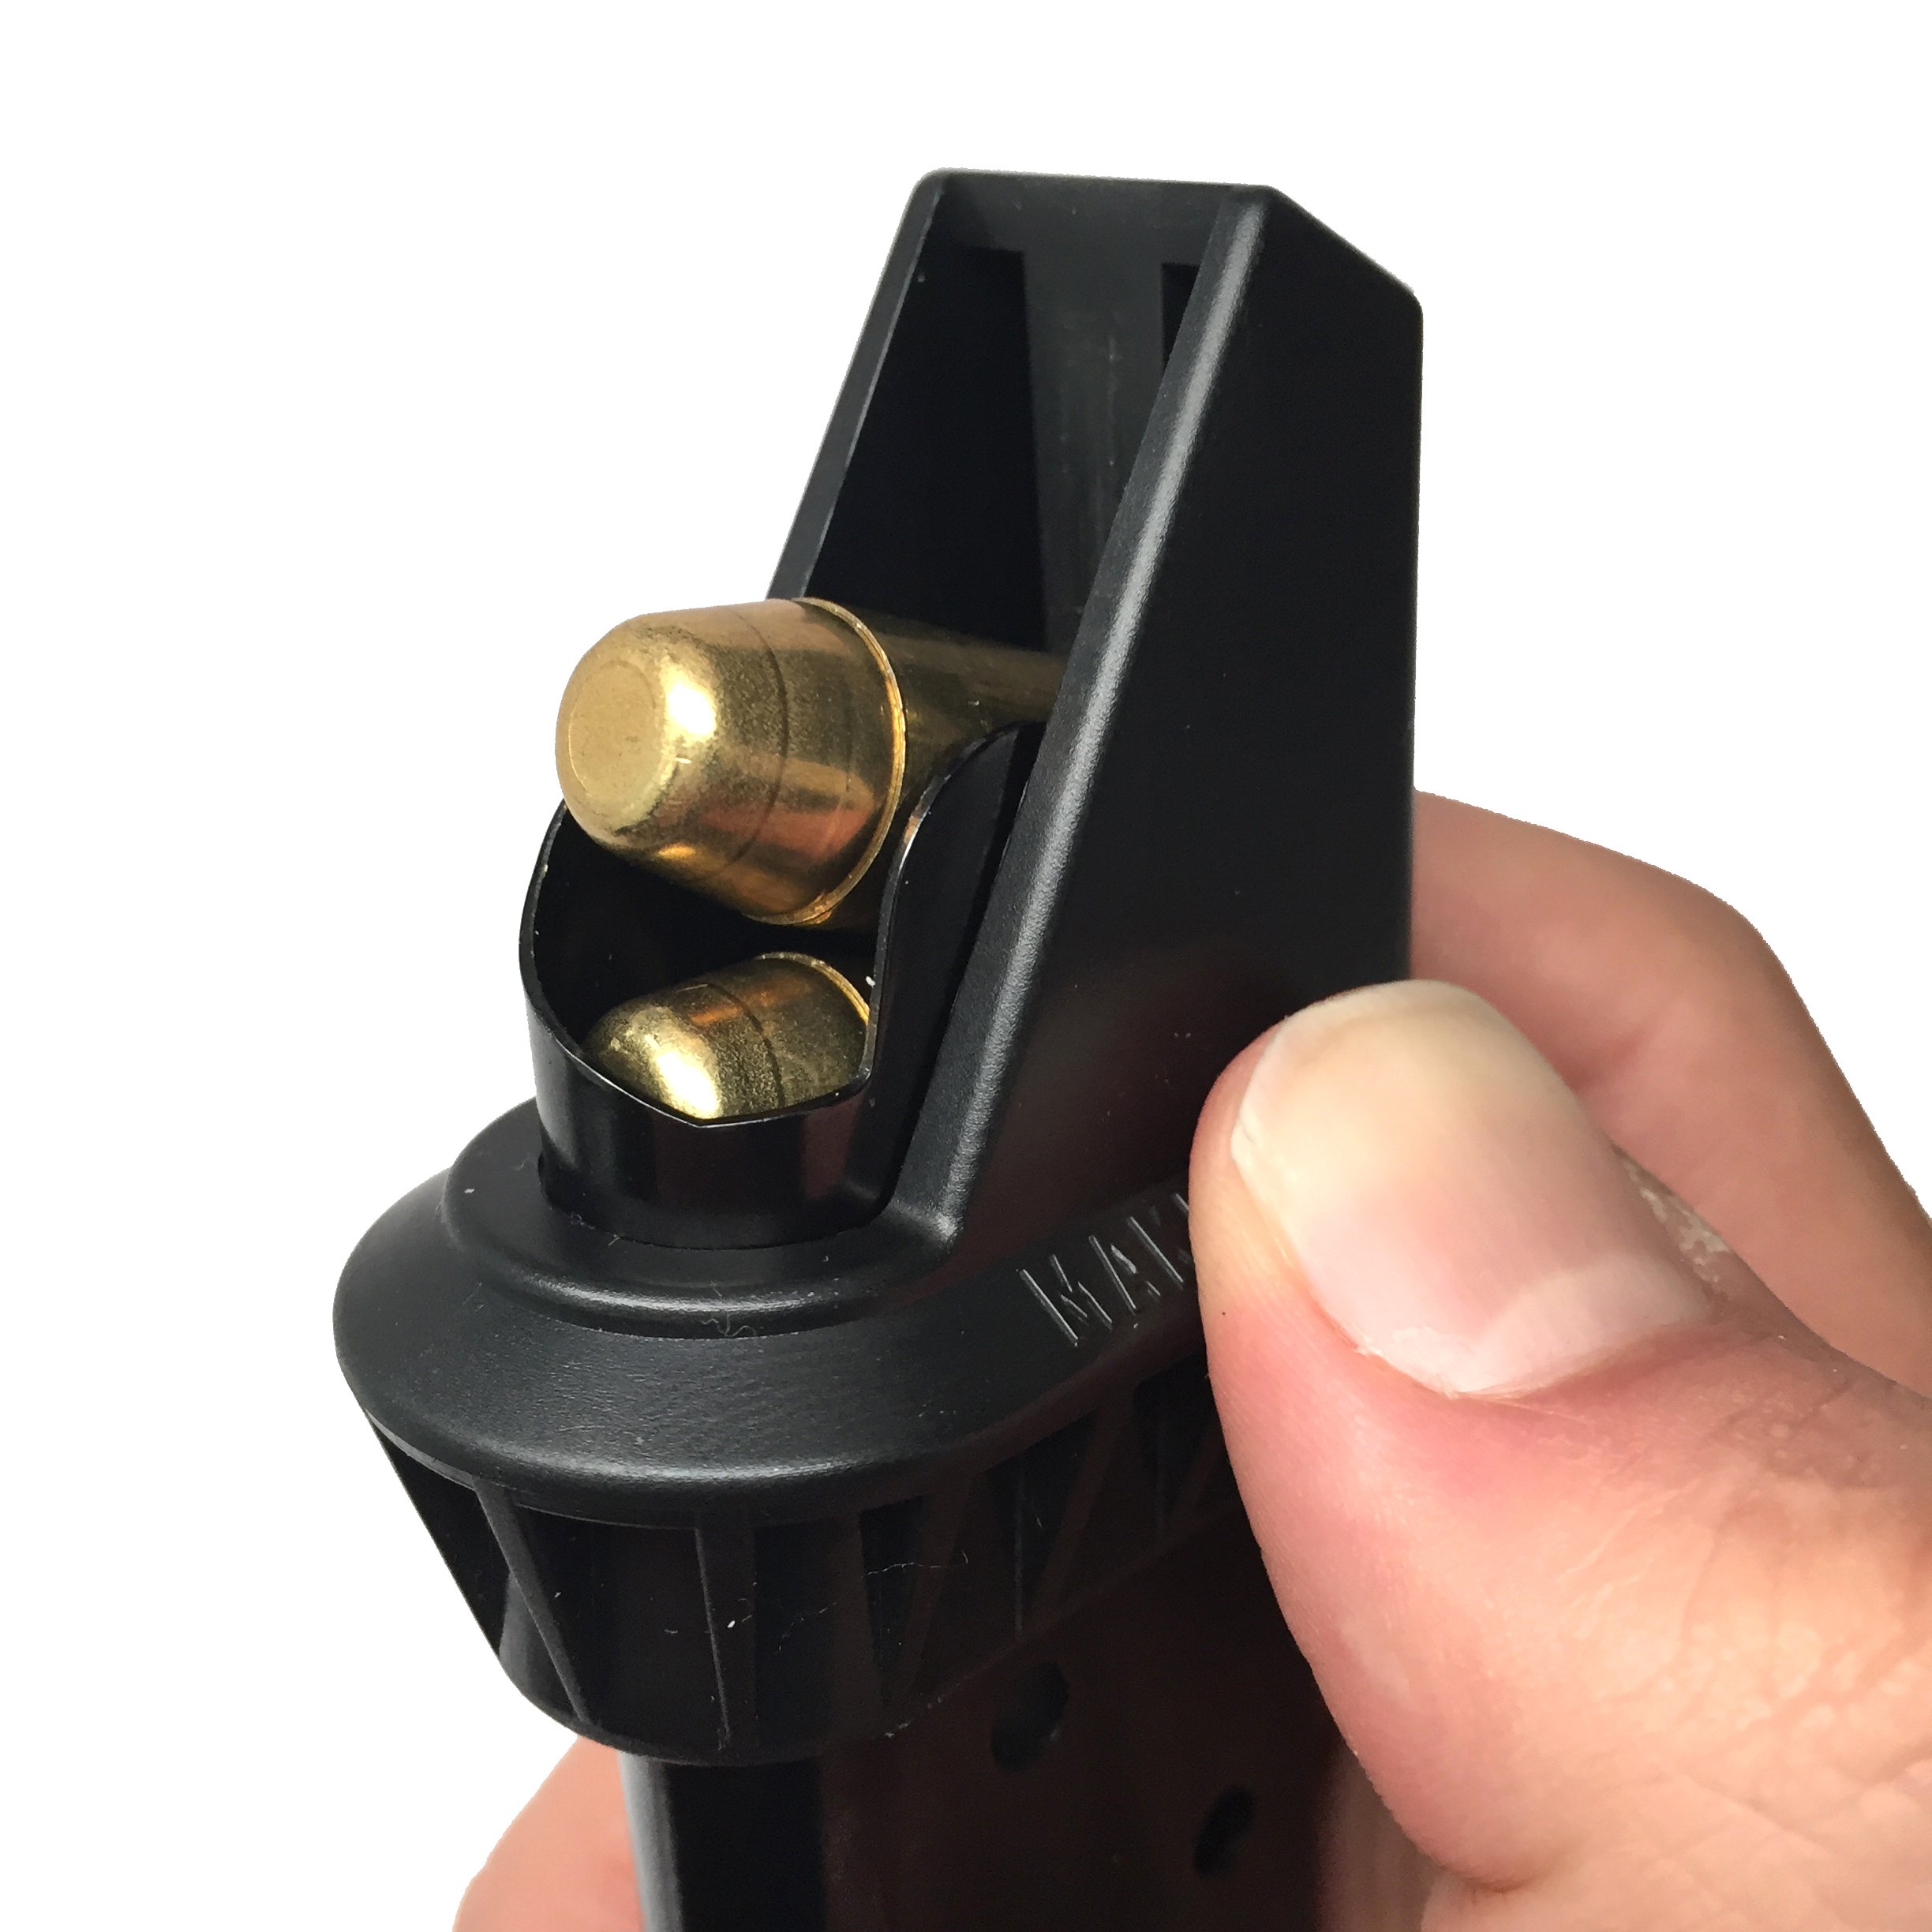 MakerShot Magazine Speed Loaders, Designed Specifically for Each Selected Magazine